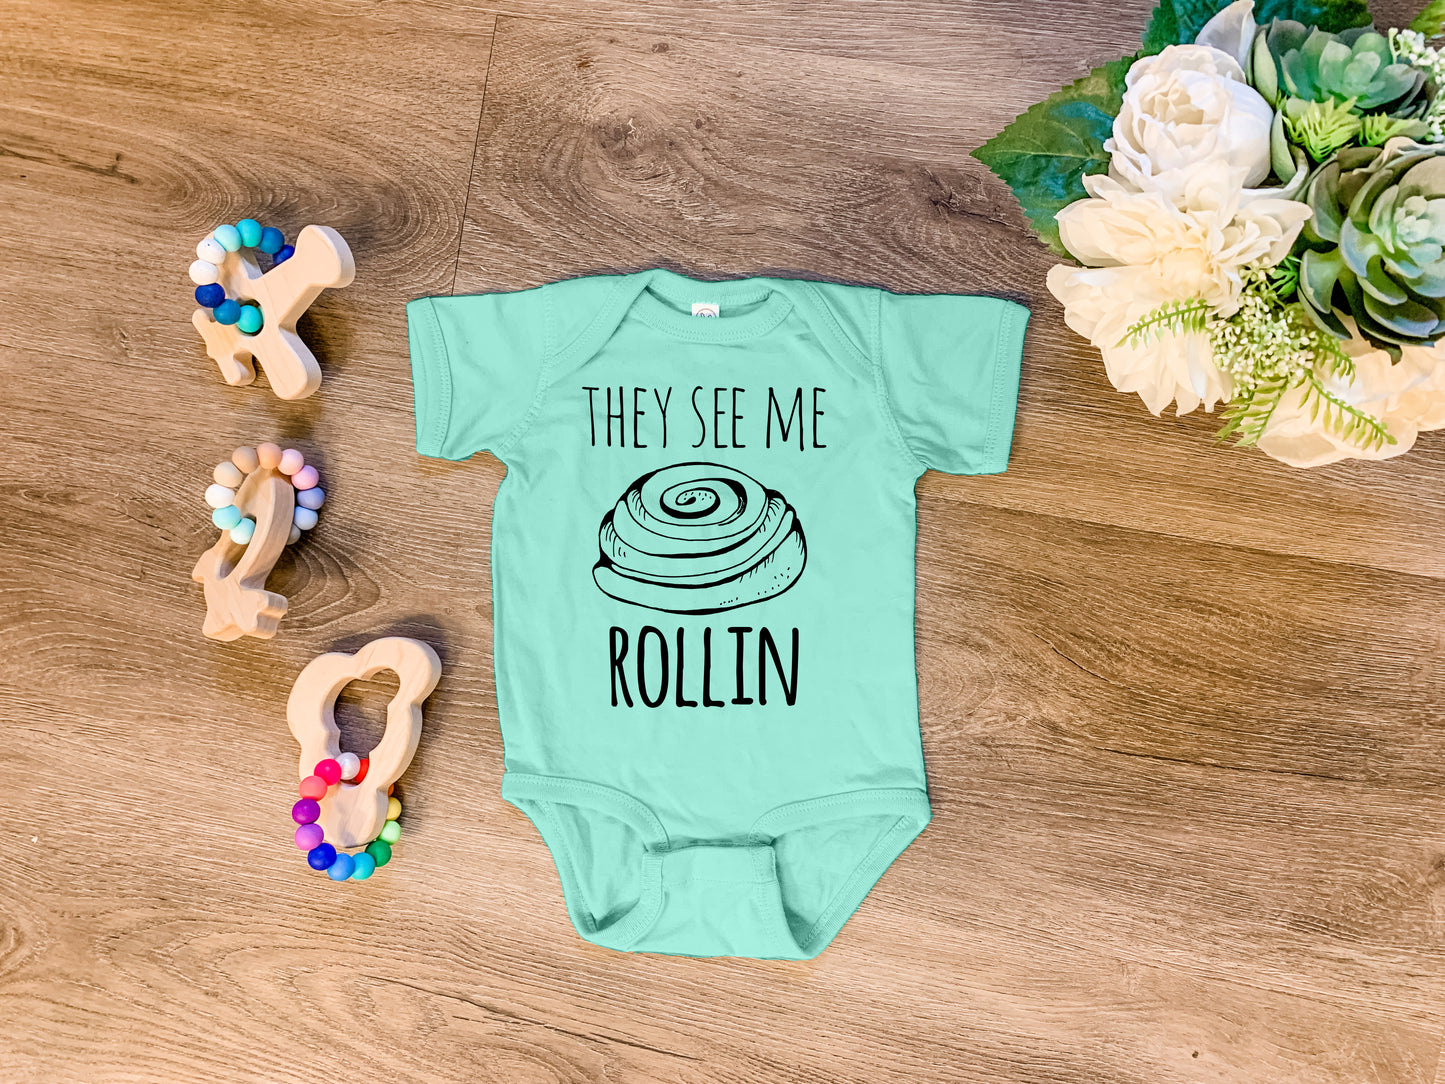 They See Me Rollin' (Cinnamon Roll) - Onesie - Heather Gray, Chill, or Lavender